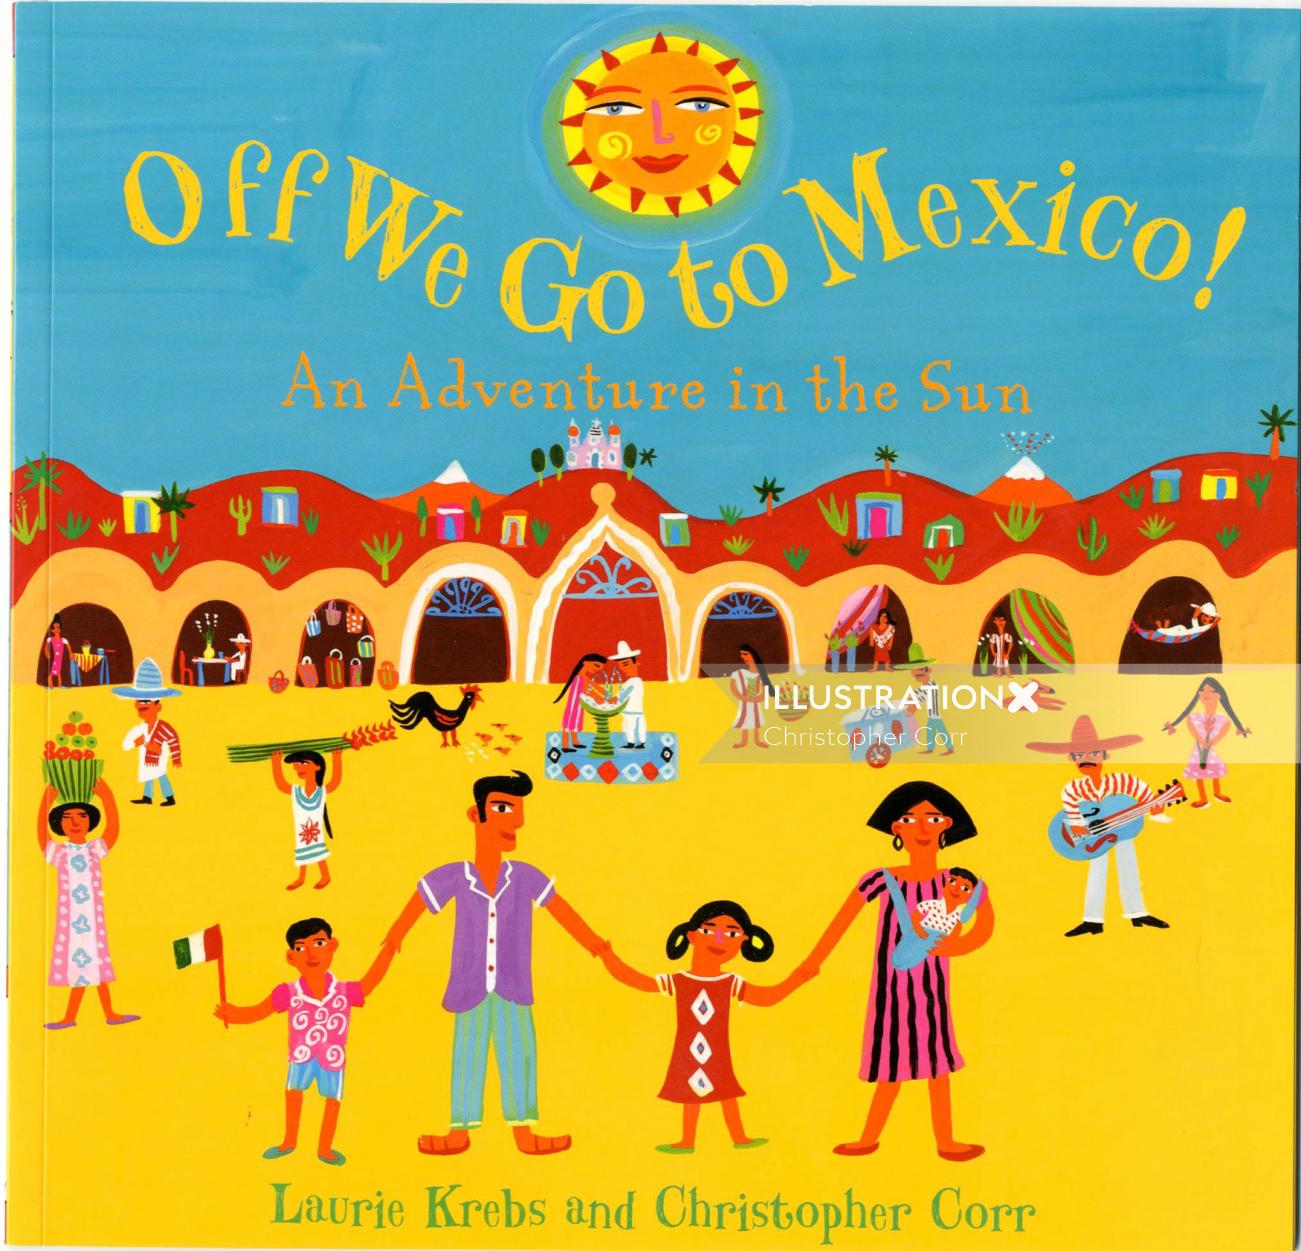 Cover design for the "Off We Go to Mexico!" book